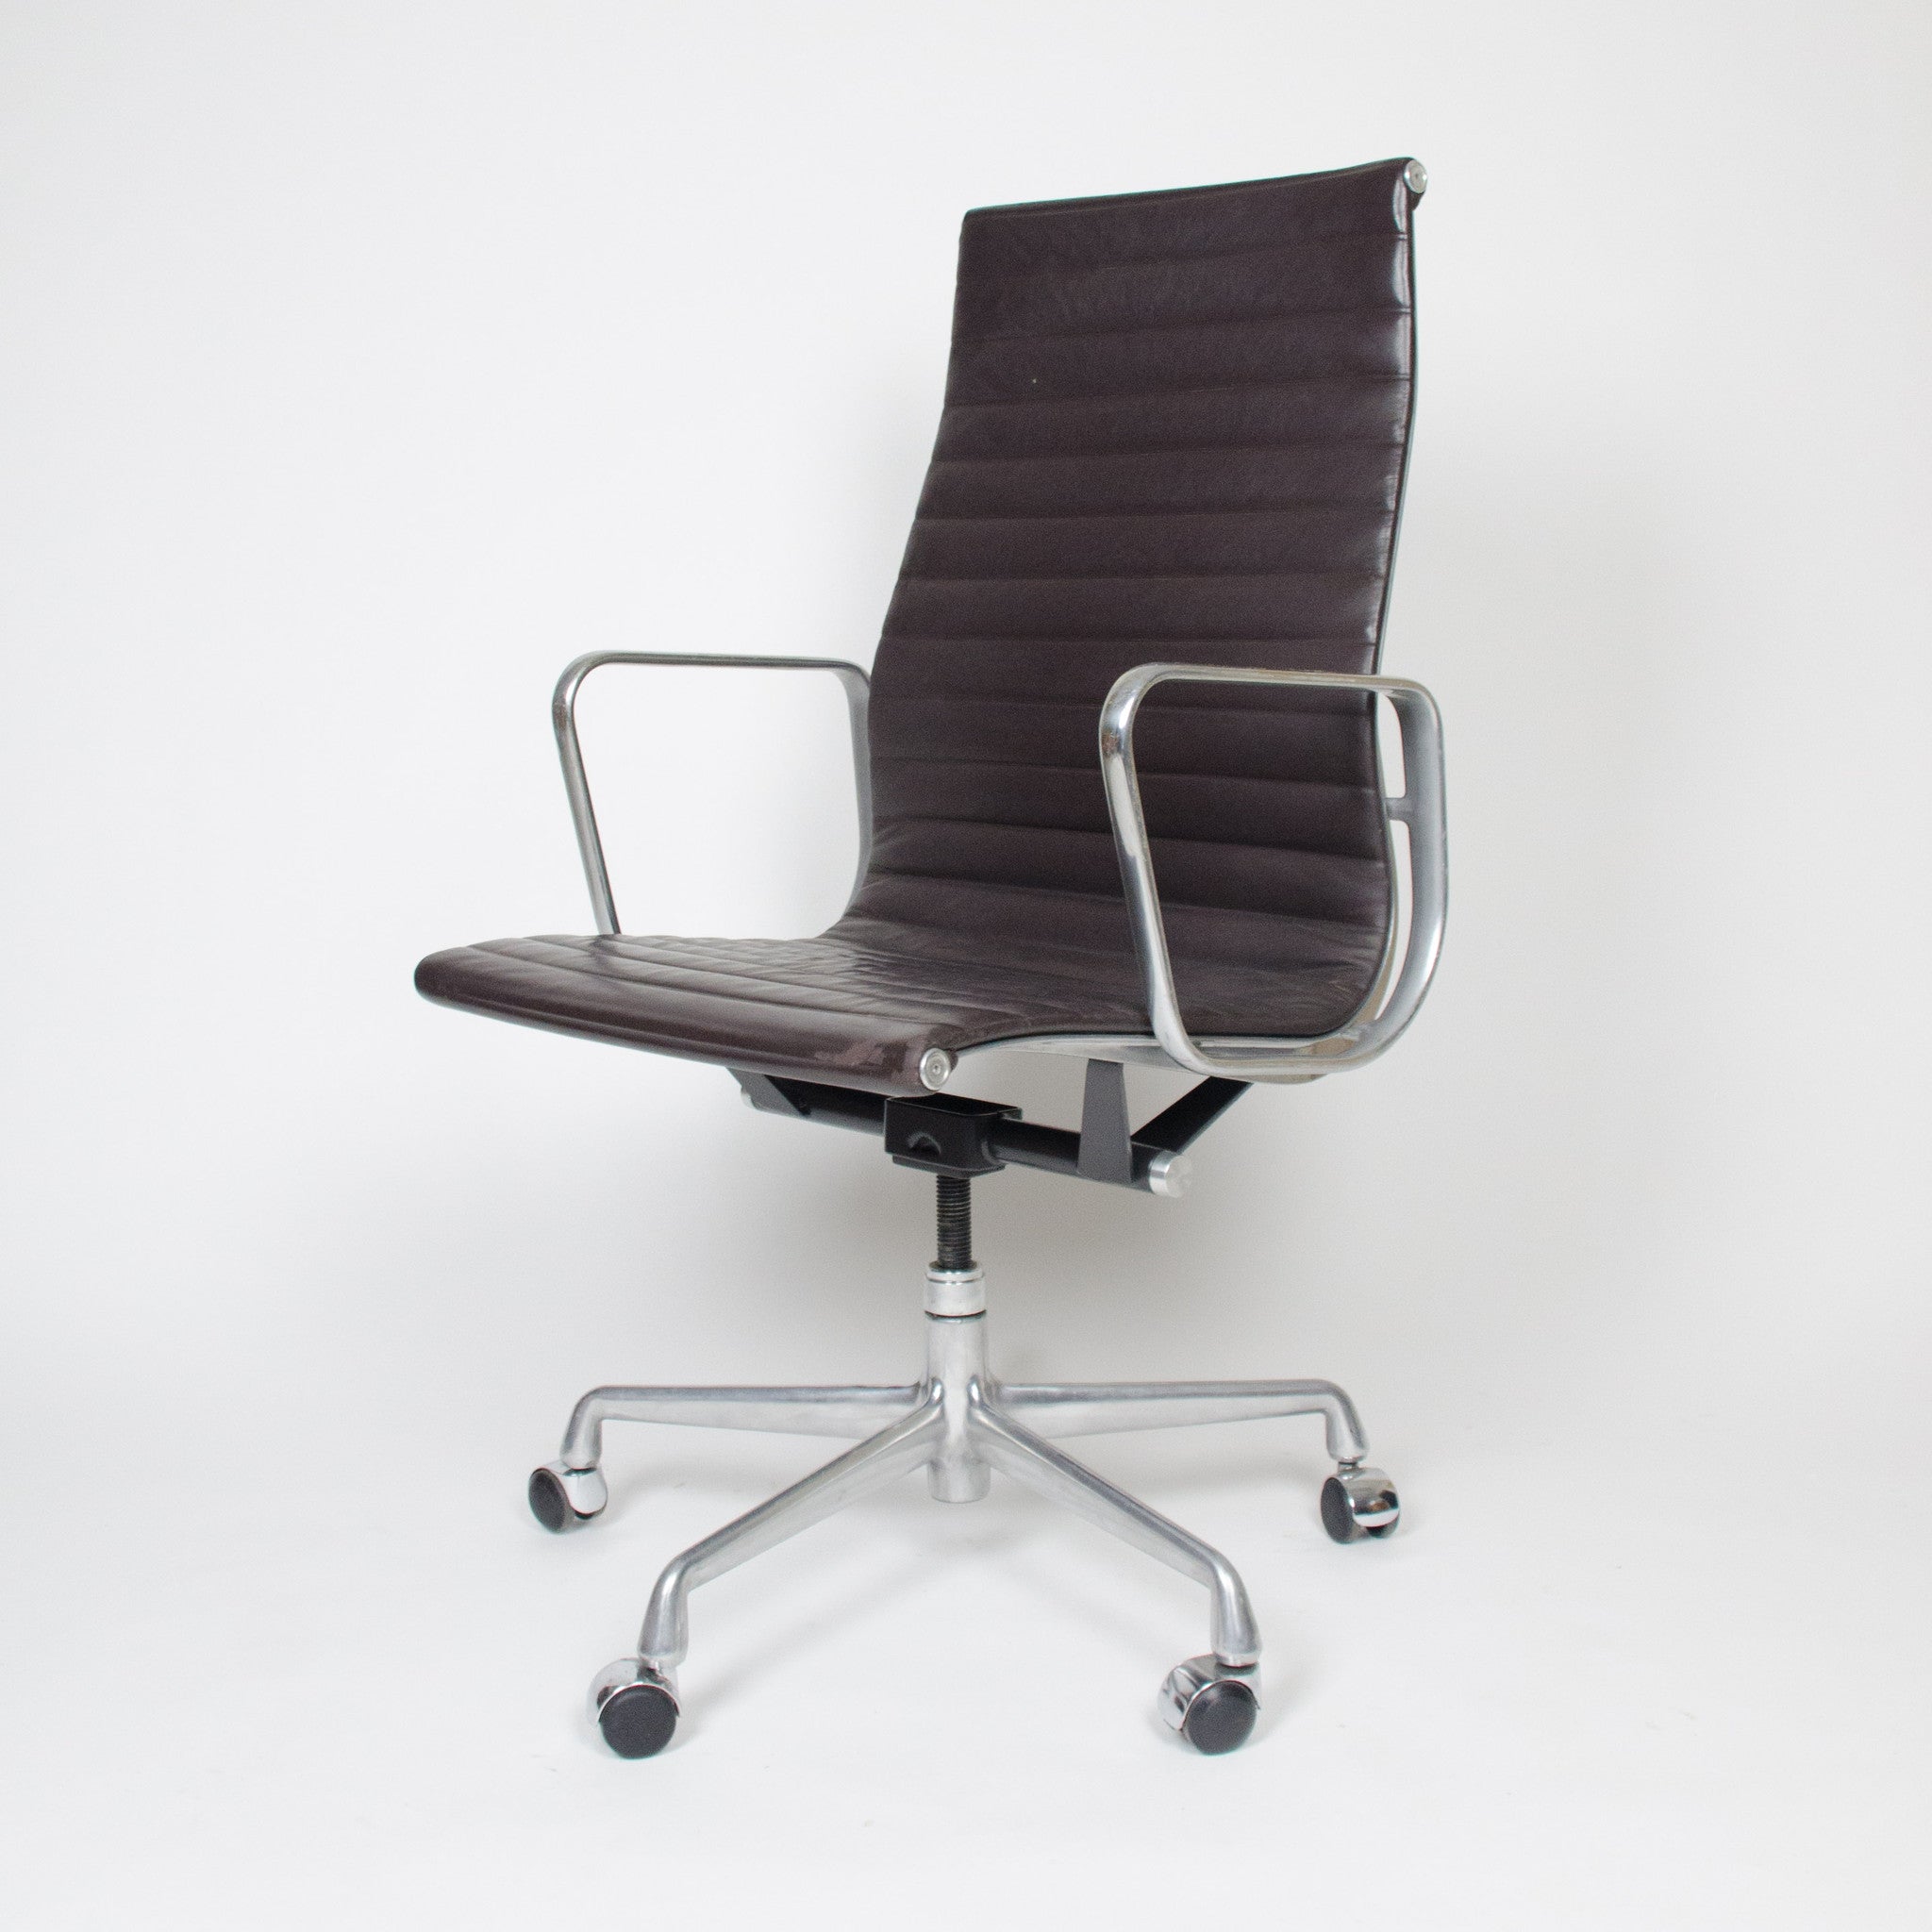 SOLD Eames Herman Miller Leather High Executive Aluminum Group Desk Chairs (5x available)